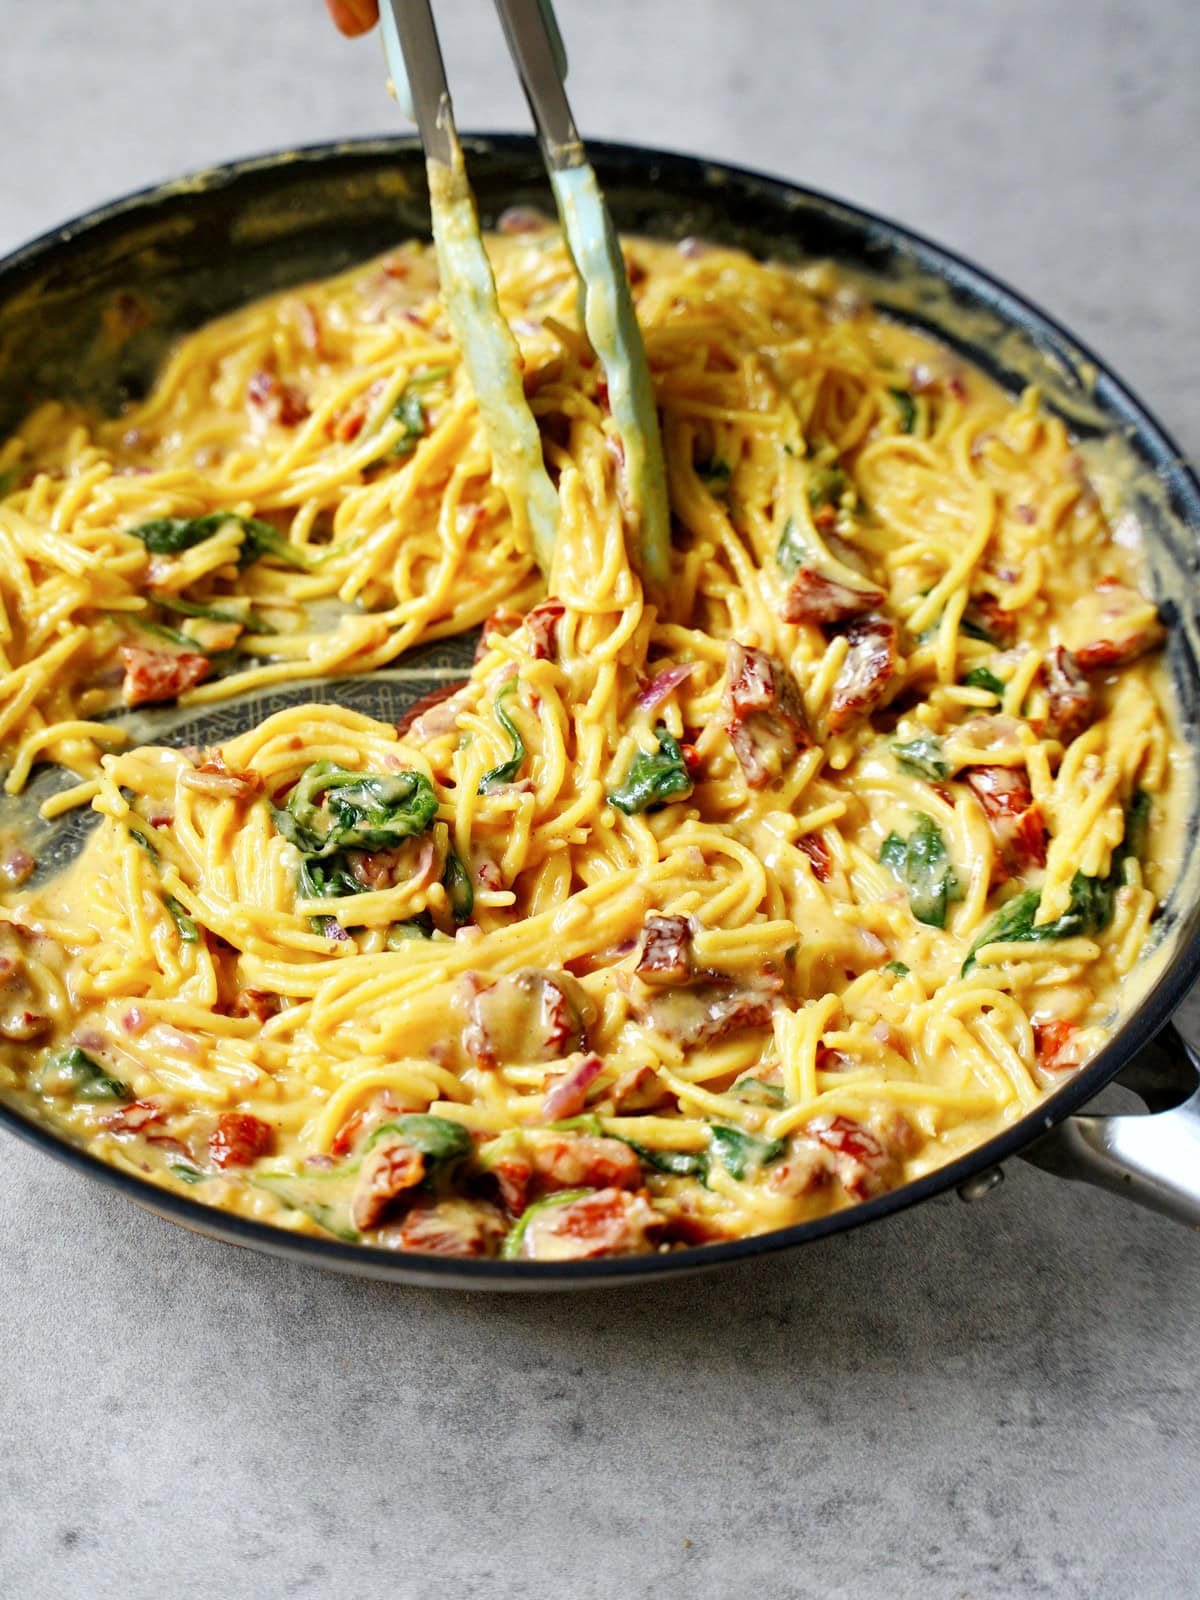 creamy spaghetti with hummus sauce and sun-dried tomatoes in skillet